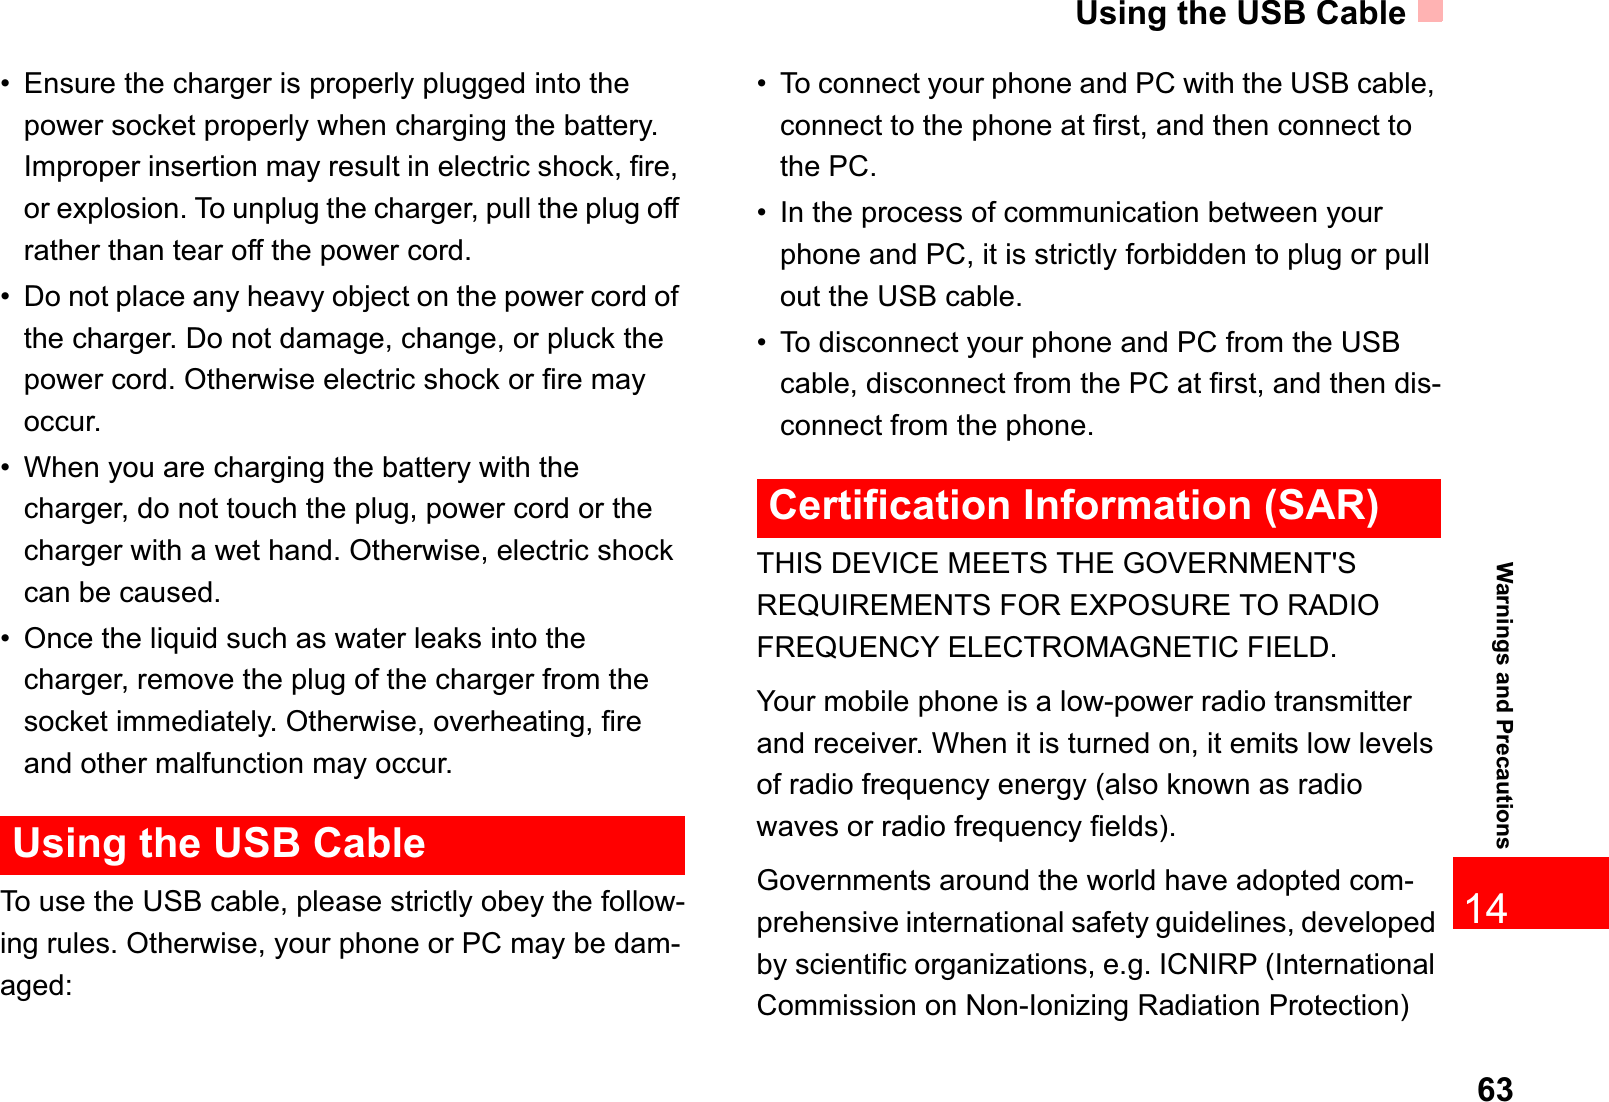 Using the USB Cable6314Warnings and Precautions• Ensure the charger is properly plugged into the power socket properly when charging the battery. Improper insertion may result in electric shock, fire, or explosion. To unplug the charger, pull the plug off rather than tear off the power cord.• Do not place any heavy object on the power cord of the charger. Do not damage, change, or pluck the power cord. Otherwise electric shock or fire may occur.• When you are charging the battery with the charger, do not touch the plug, power cord or the charger with a wet hand. Otherwise, electric shock can be caused.• Once the liquid such as water leaks into the charger, remove the plug of the charger from the socket immediately. Otherwise, overheating, fire and other malfunction may occur.Using the USB CableTo use the USB cable, please strictly obey the follow-ing rules. Otherwise, your phone or PC may be dam-aged:• To connect your phone and PC with the USB cable, connect to the phone at first, and then connect to the PC.• In the process of communication between your phone and PC, it is strictly forbidden to plug or pull out the USB cable.• To disconnect your phone and PC from the USB cable, disconnect from the PC at first, and then dis-connect from the phone.Certification Information (SAR)THIS DEVICE MEETS THE GOVERNMENT&apos;S REQUIREMENTS FOR EXPOSURE TO RADIO FREQUENCY ELECTROMAGNETIC FIELD.Your mobile phone is a low-power radio transmitter and receiver. When it is turned on, it emits low levels of radio frequency energy (also known as radio waves or radio frequency fields).Governments around the world have adopted com-prehensive international safety guidelines, developed by scientific organizations, e.g. ICNIRP (International Commission on Non-Ionizing Radiation Protection) 